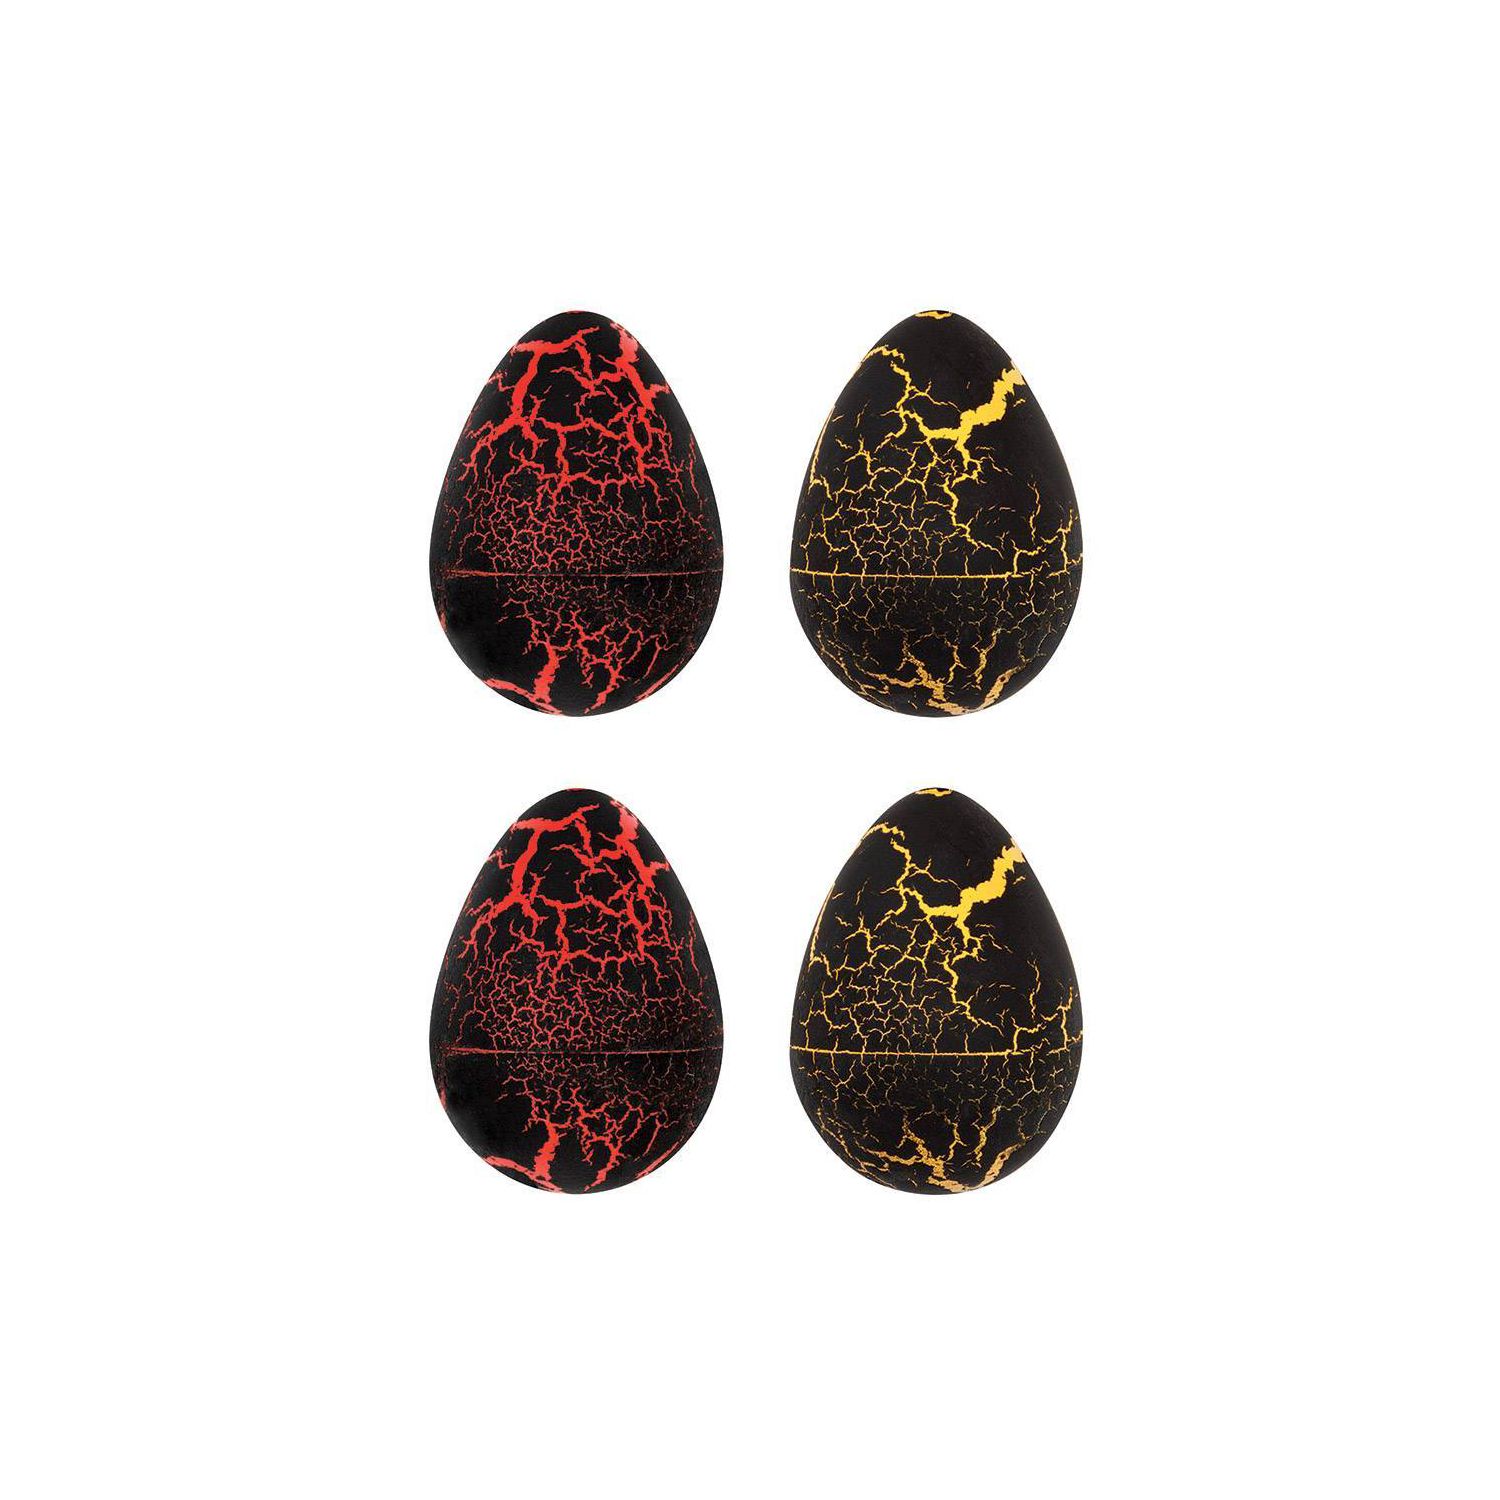 Jurassic World Dominion Hatching Eggs Party Favor [4 per Pack]